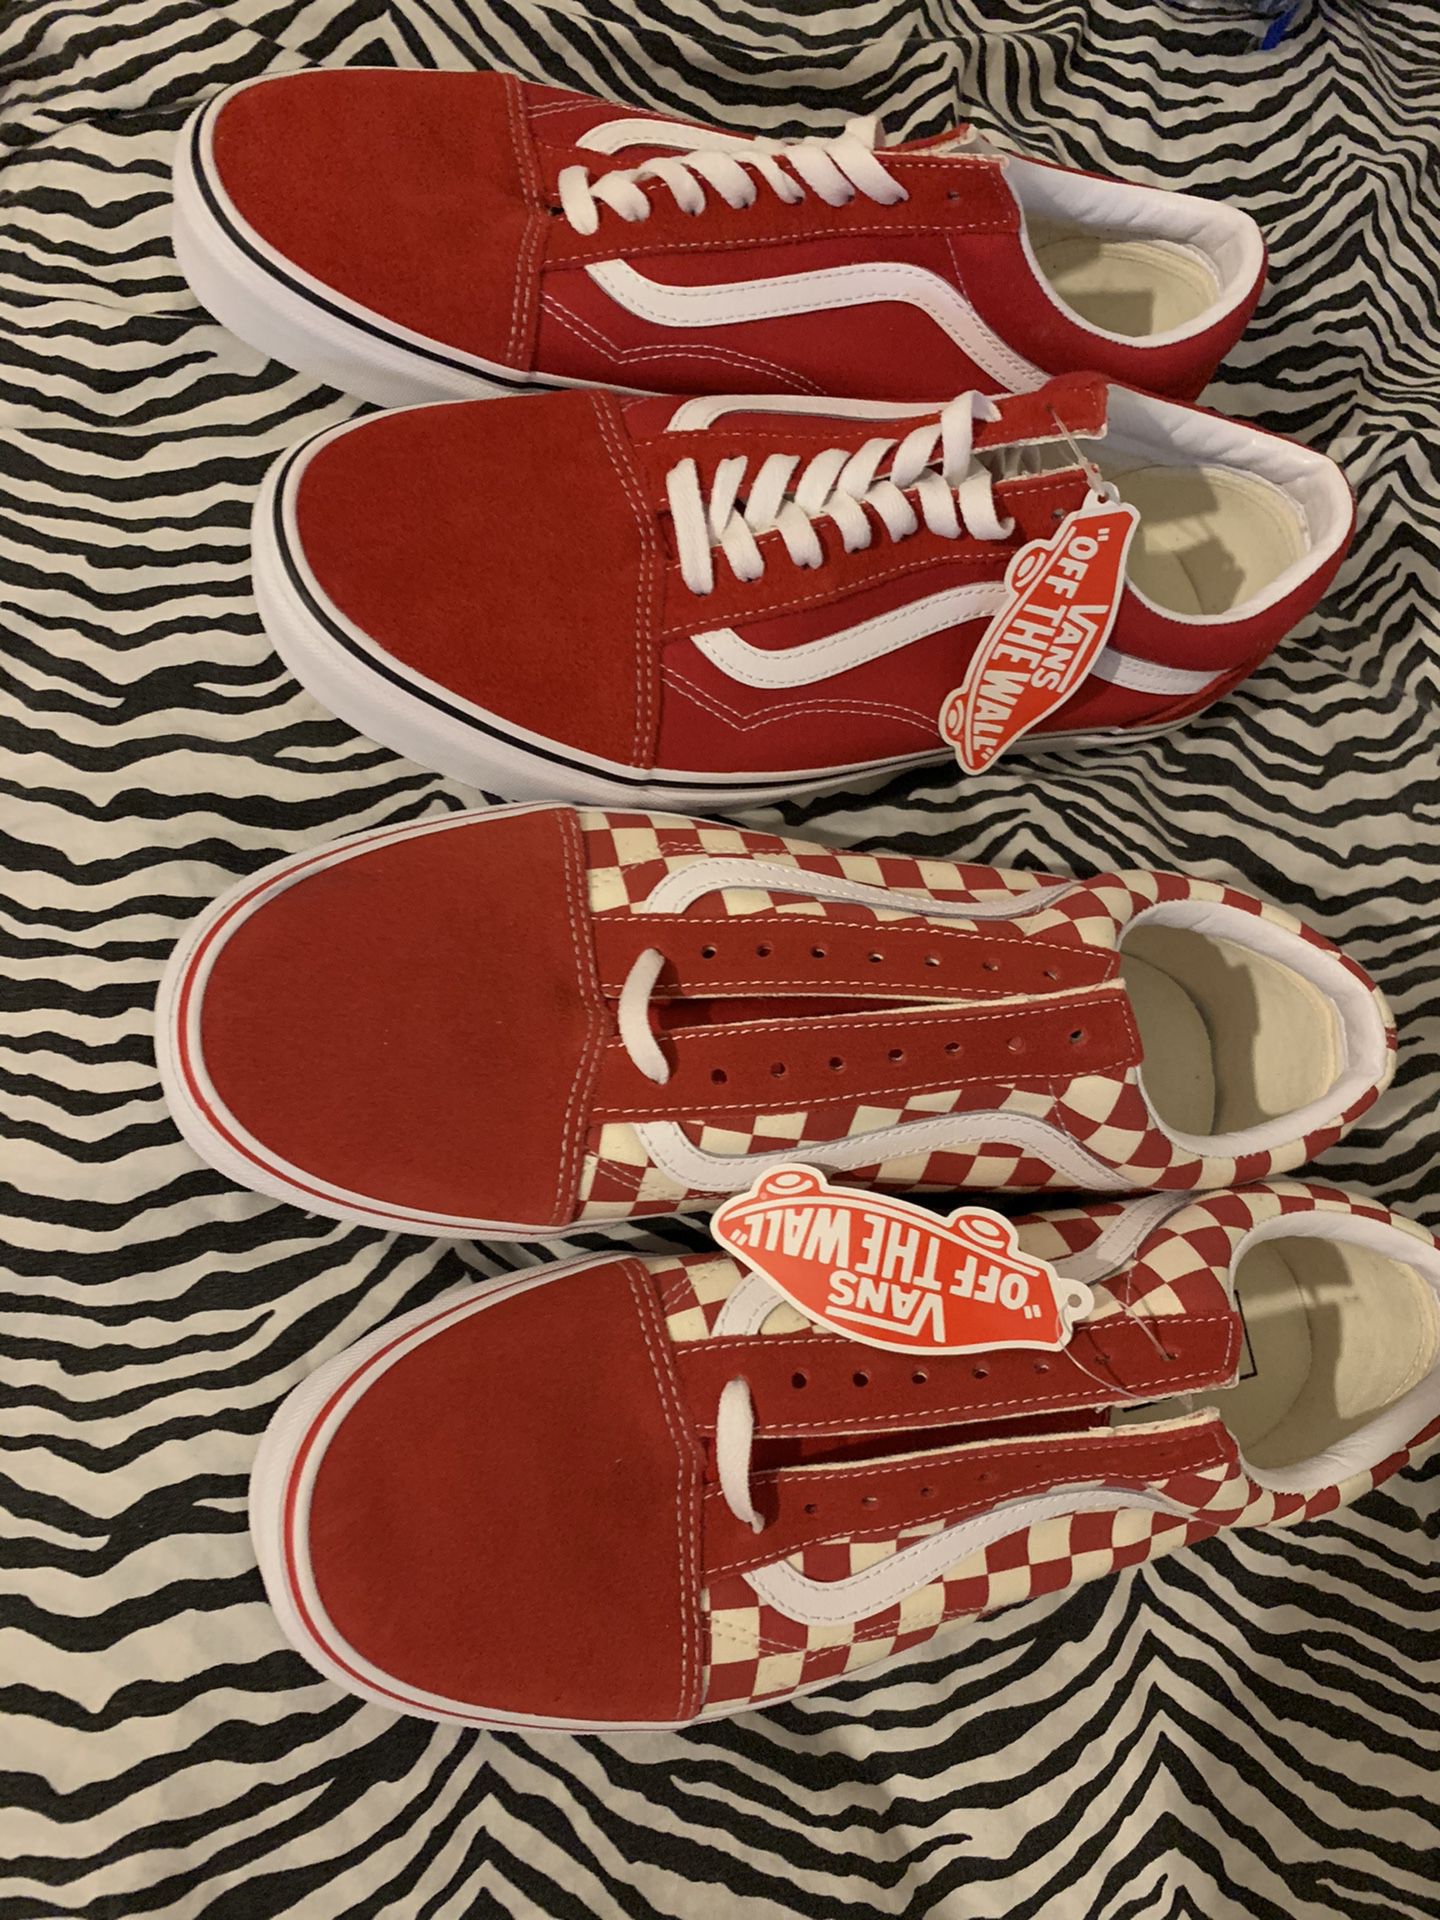 ***Checkered only***Old Skool Vans size 12 Never worn